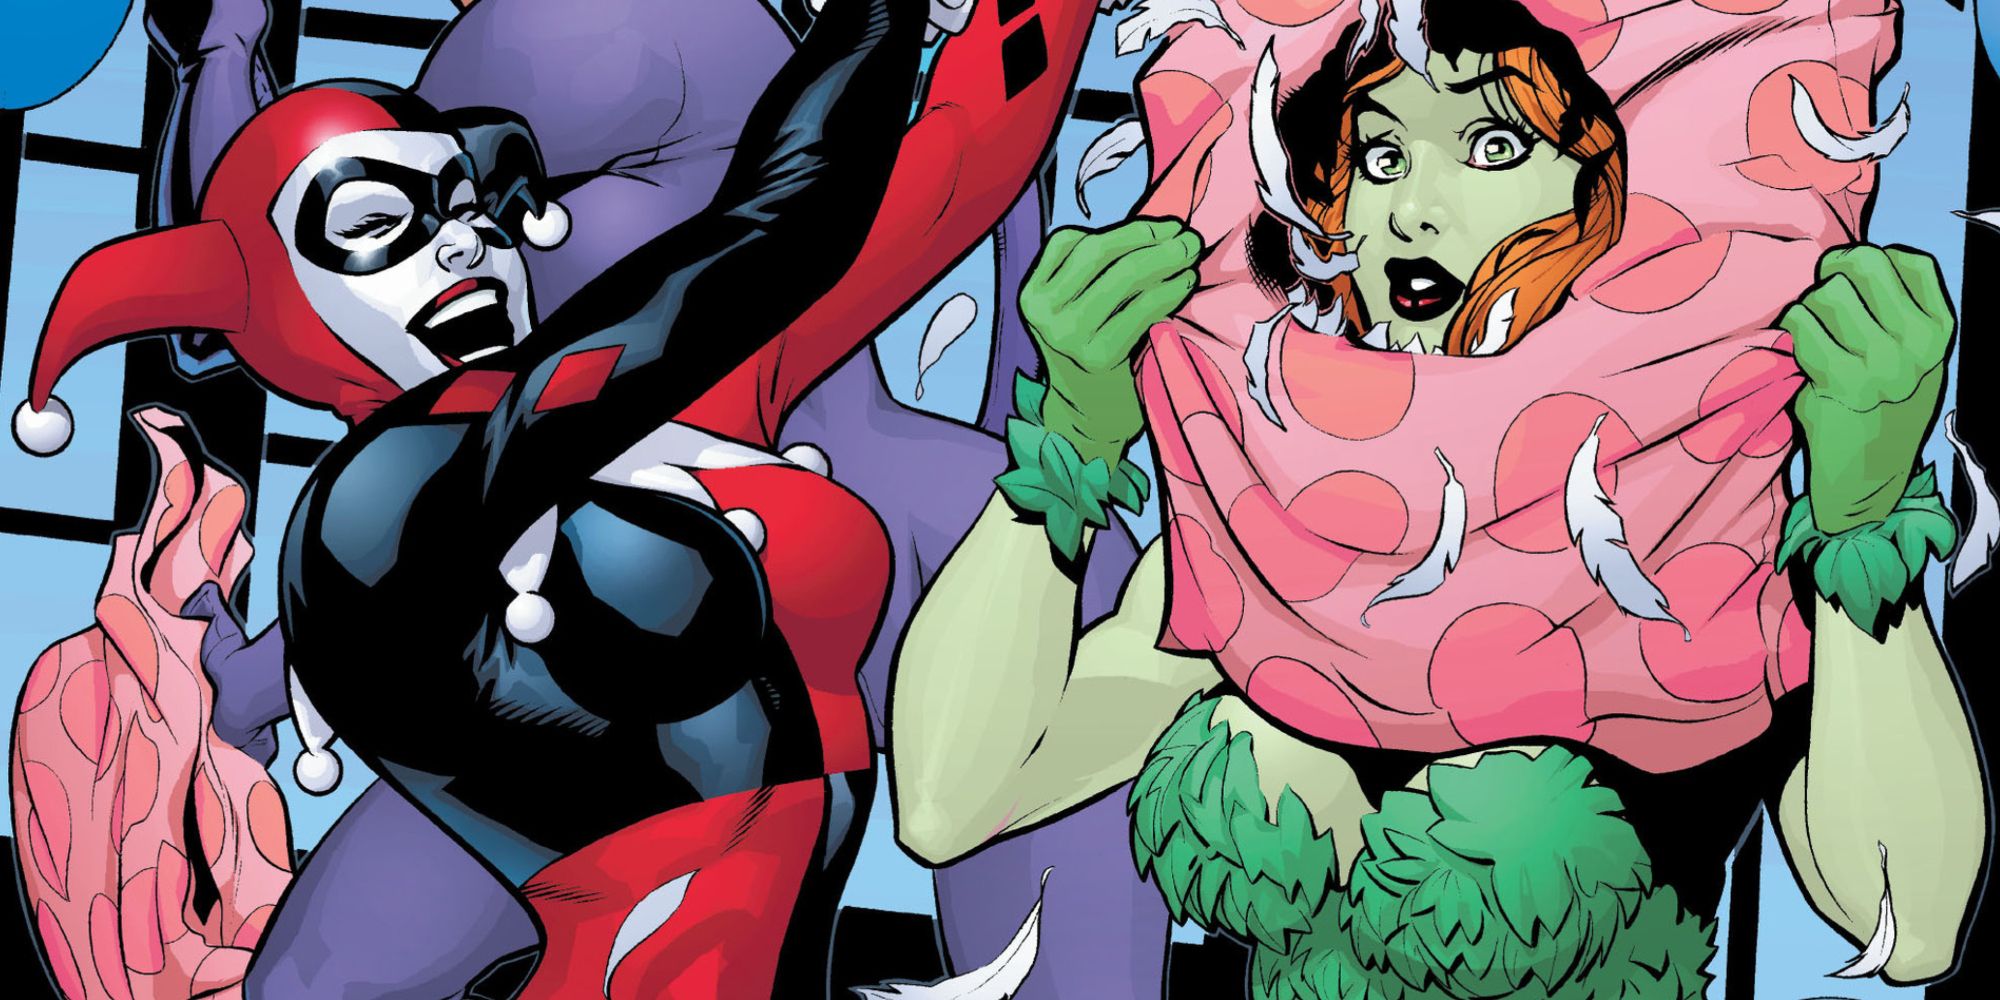 Harley Quinn and Poison Ivy horse around in DC Comics.